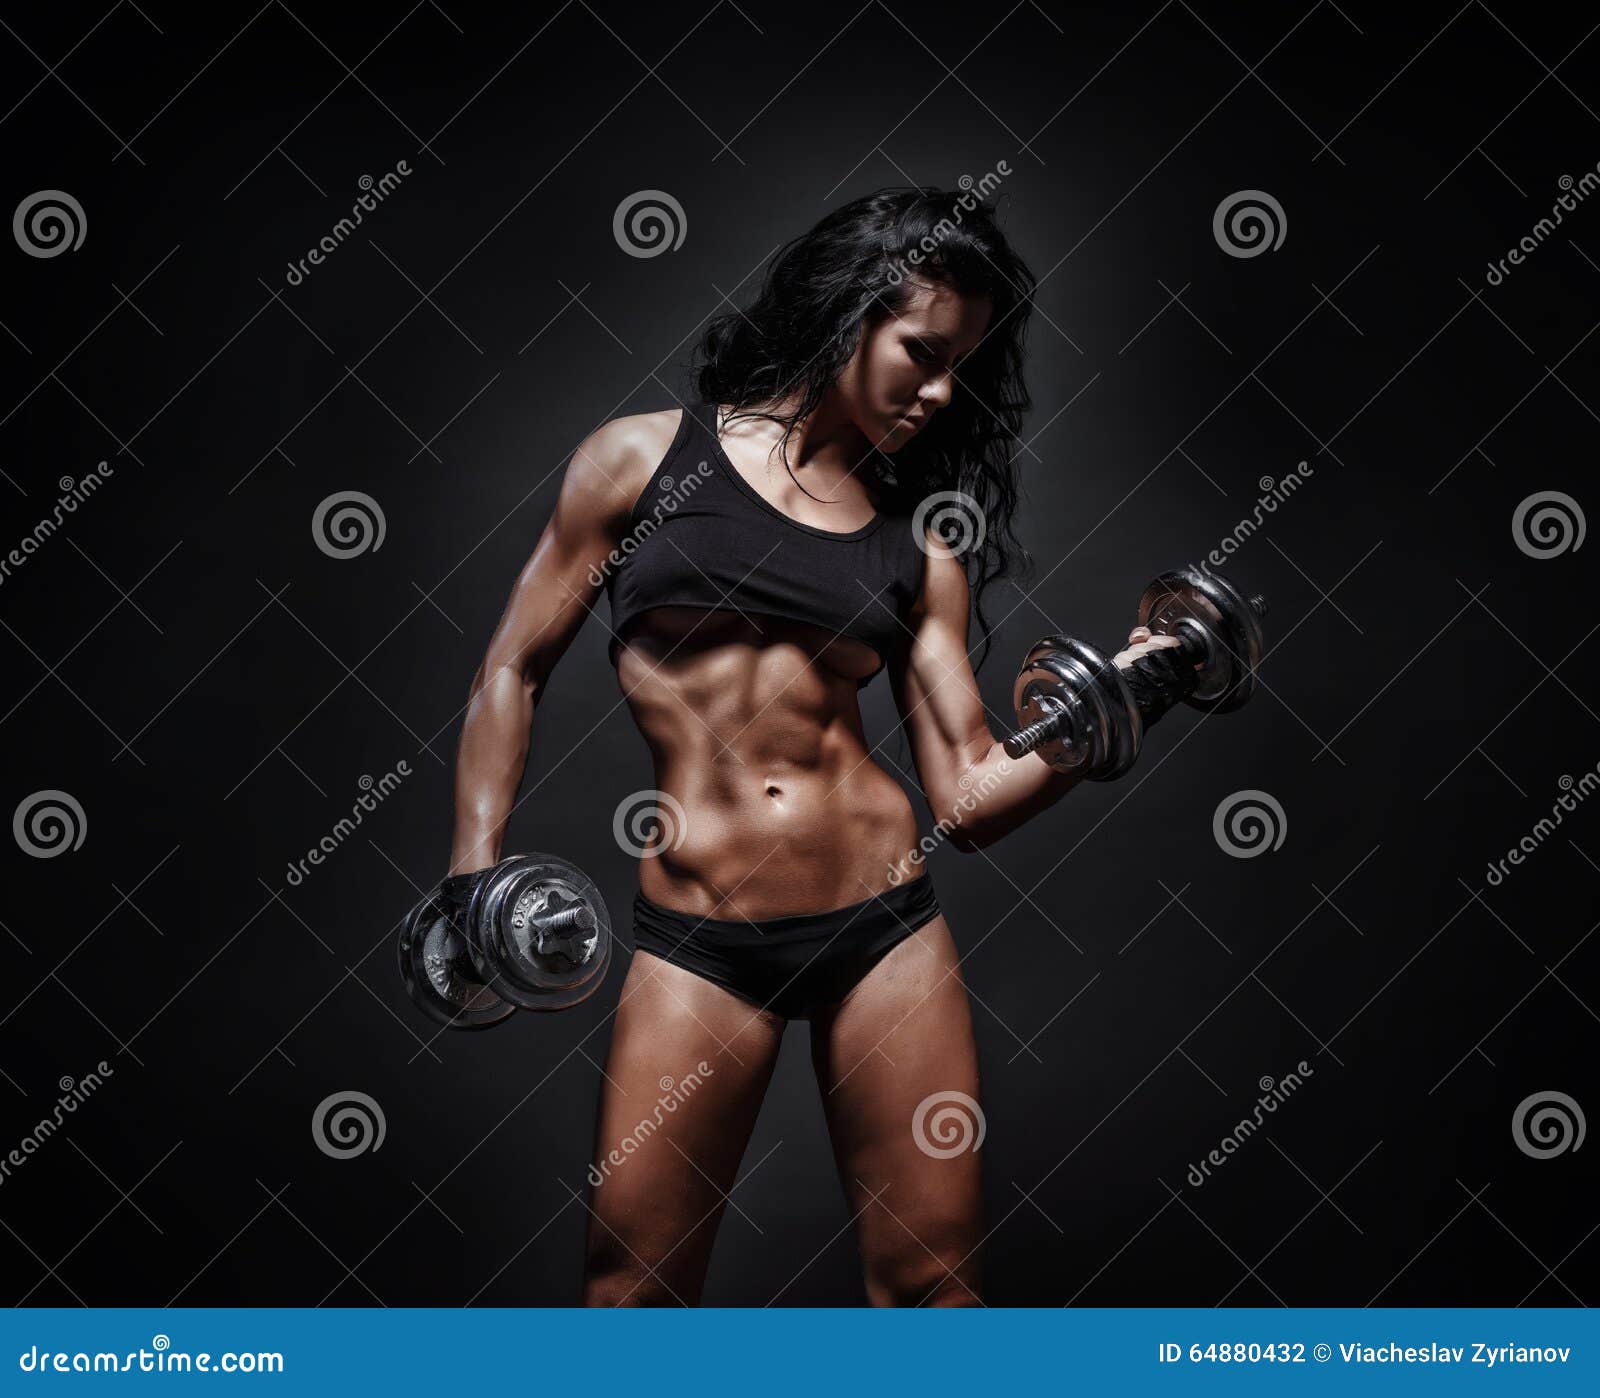 Perfect Fitness Body of Beautiful Woman. Fitness Instructor in Sports  Clothing. Female Model with Fit Muscular and Slim Body in Sportswear. Young  Fit Girl Lifting Dumbbells Photos